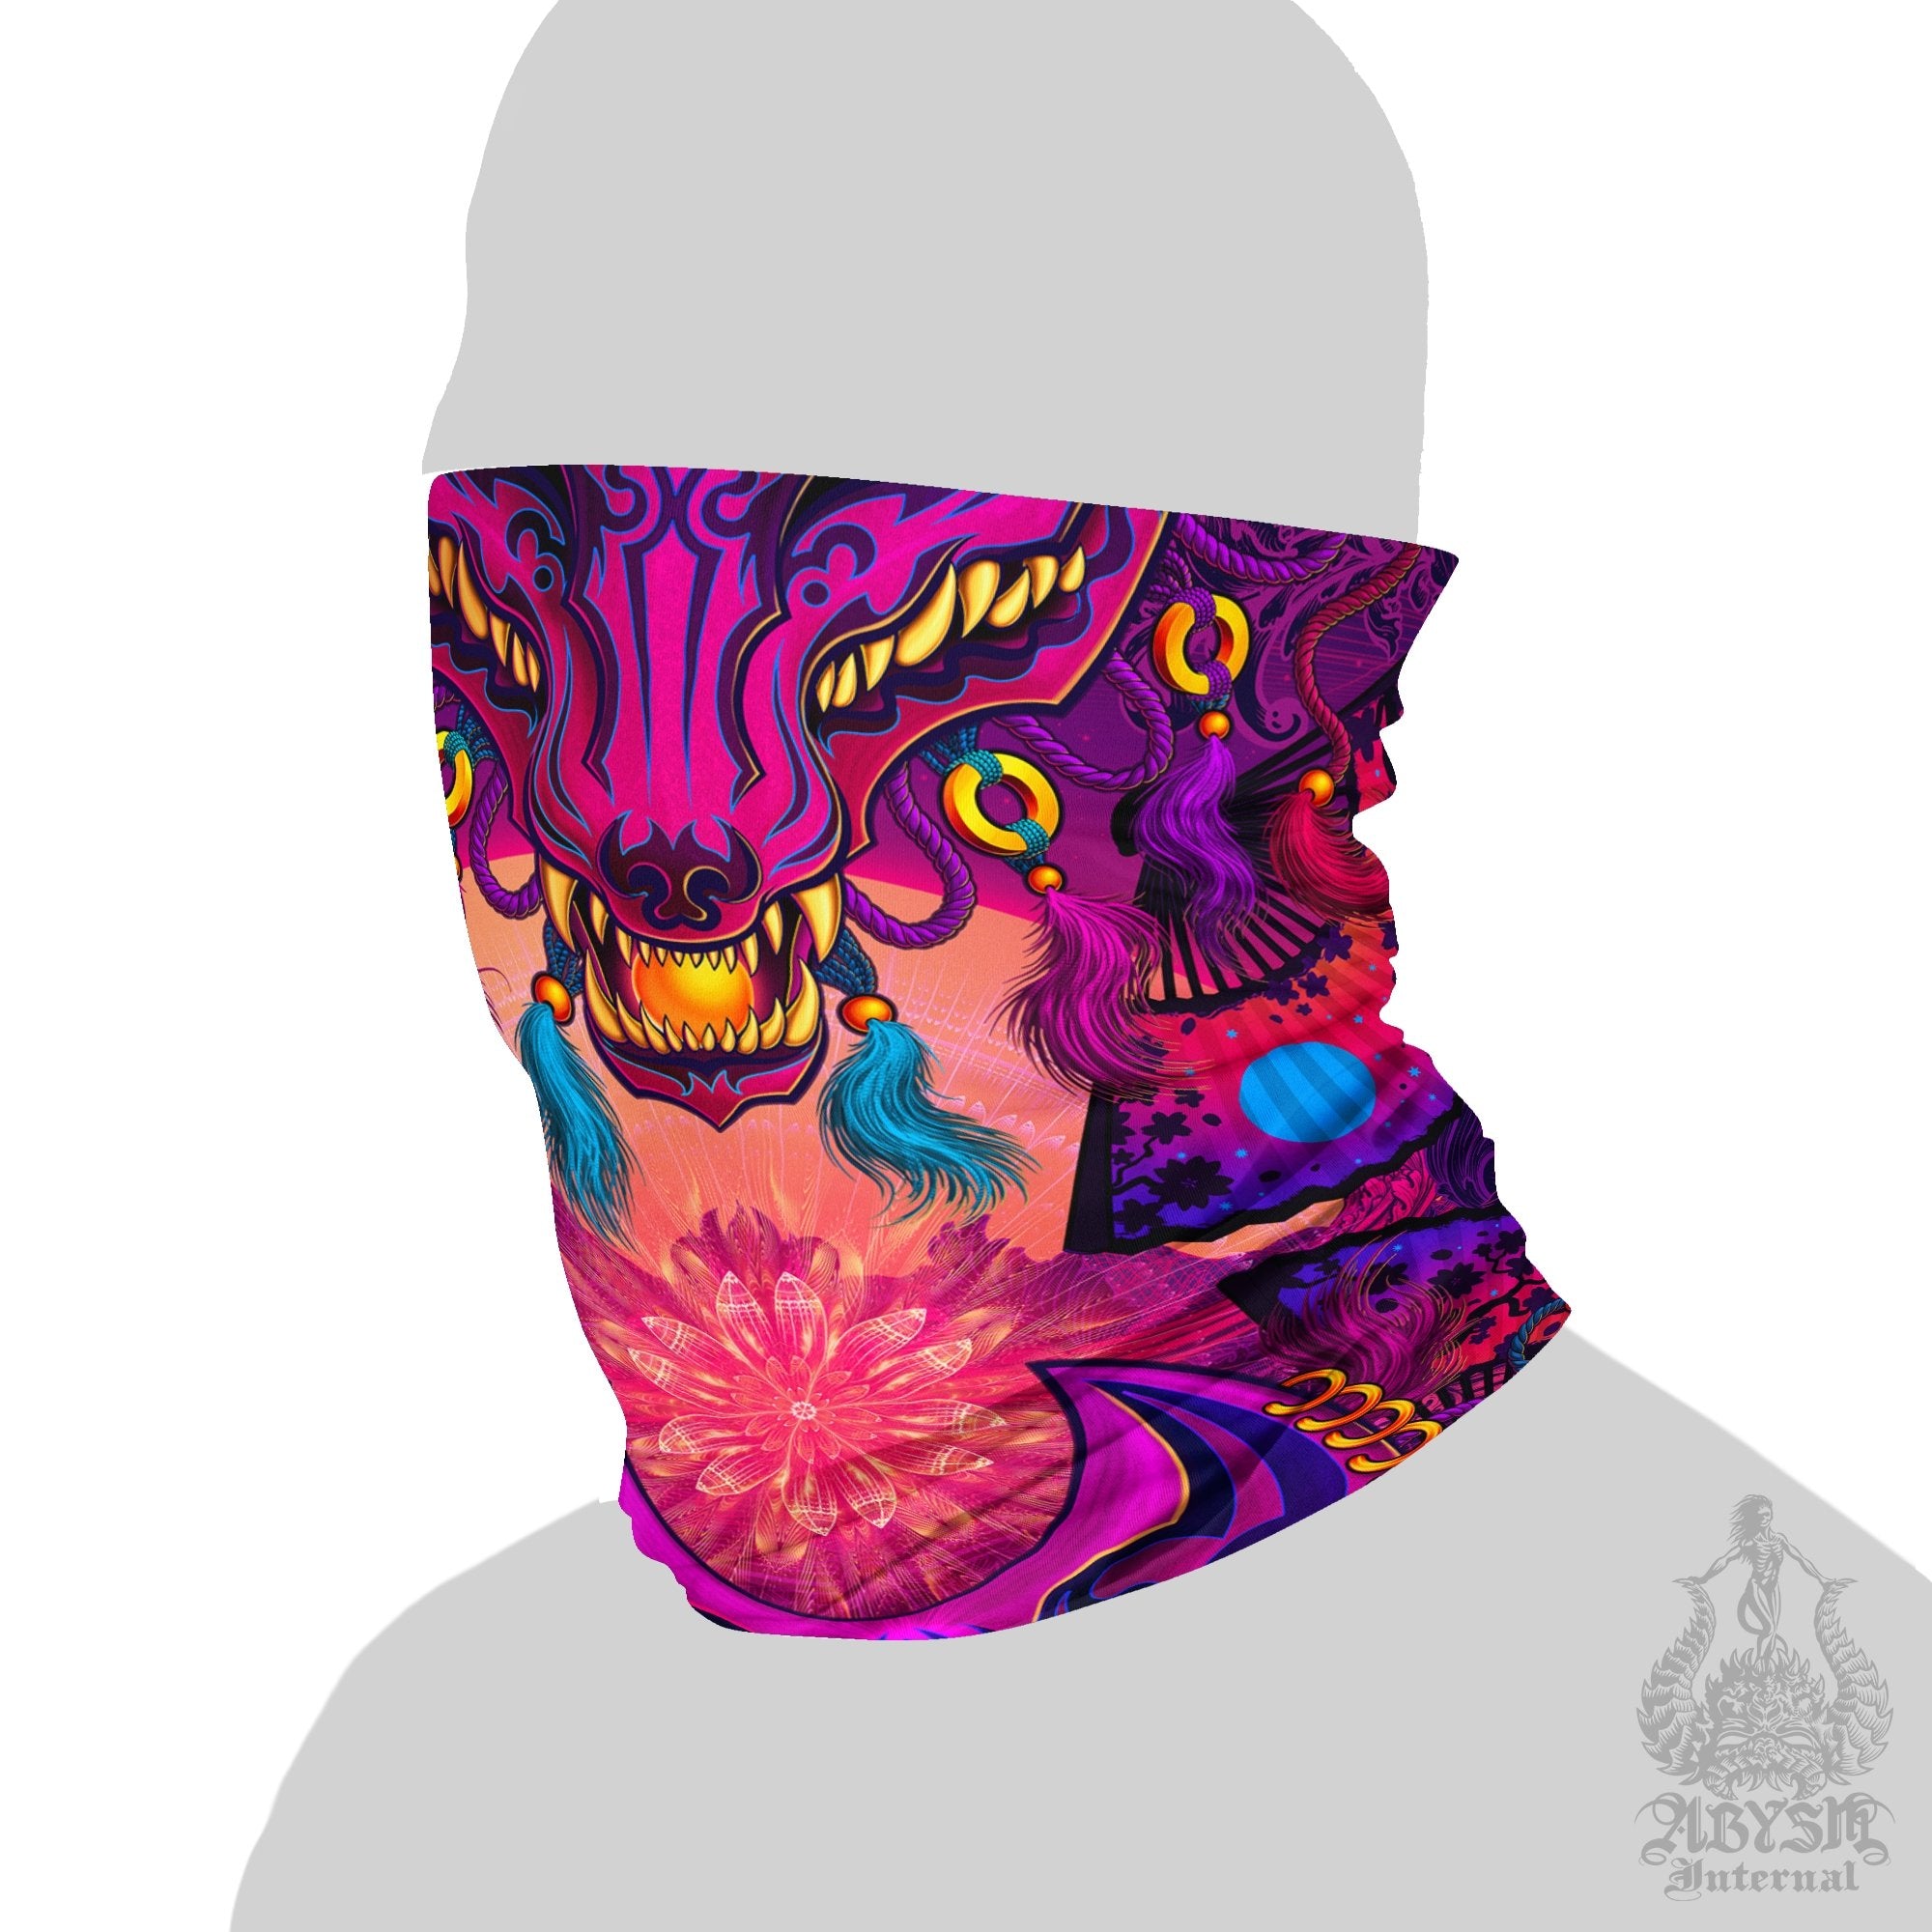 Japanese Vaporwave Neck Gaiter, Face Mask, Synthwave Head Covering, Psychedelic 80s Retrowave, Anime and Manga Convention or Outfit - Kitsune Fox - Abysm Internal